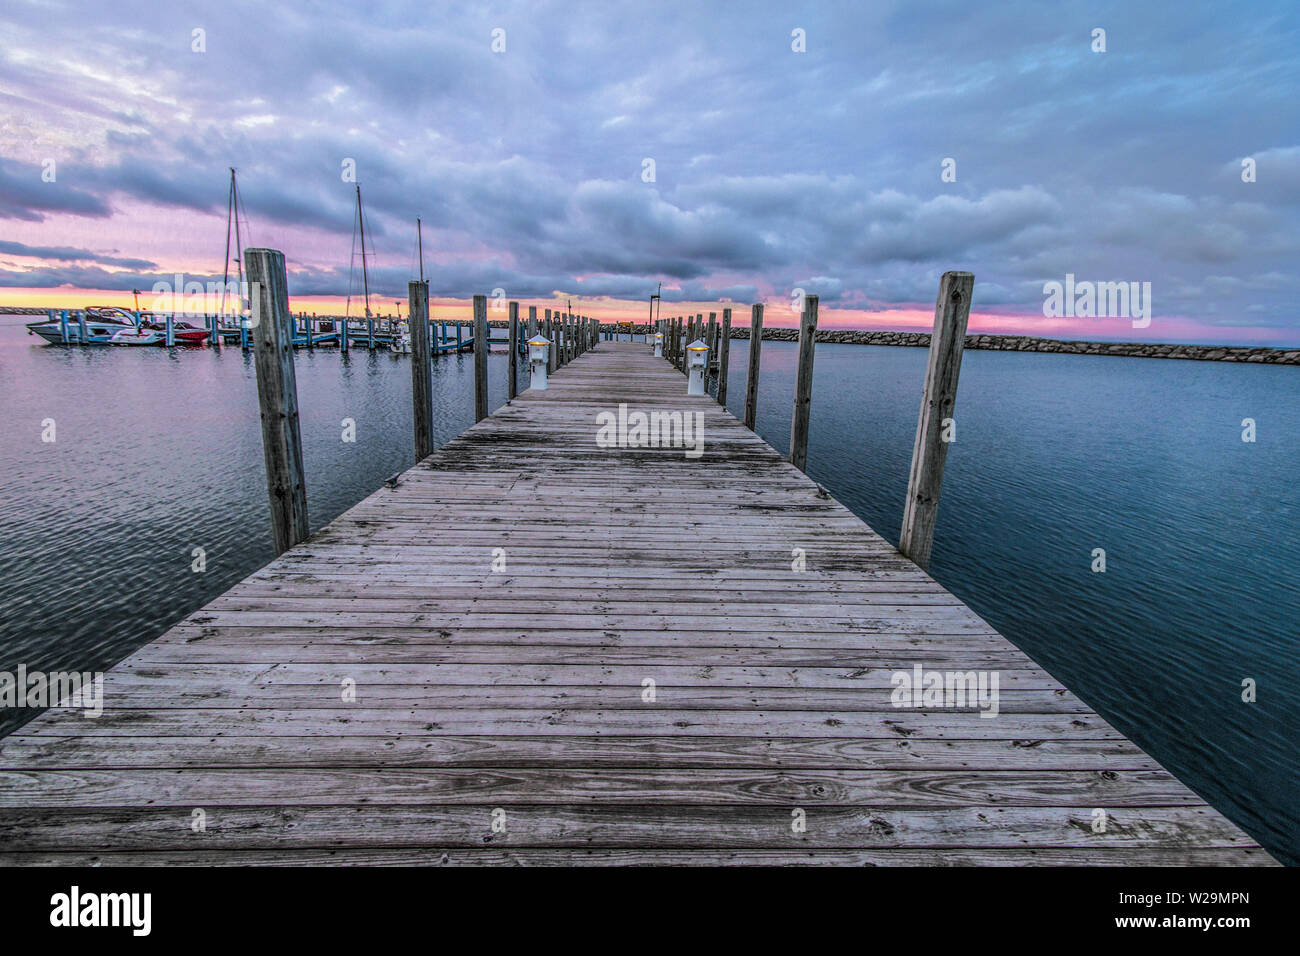 Wooden Dock Sunset. Wooden dock disappears to the horizon with a sunset sky at a harbor marina with various boats in the background. Stock Photo